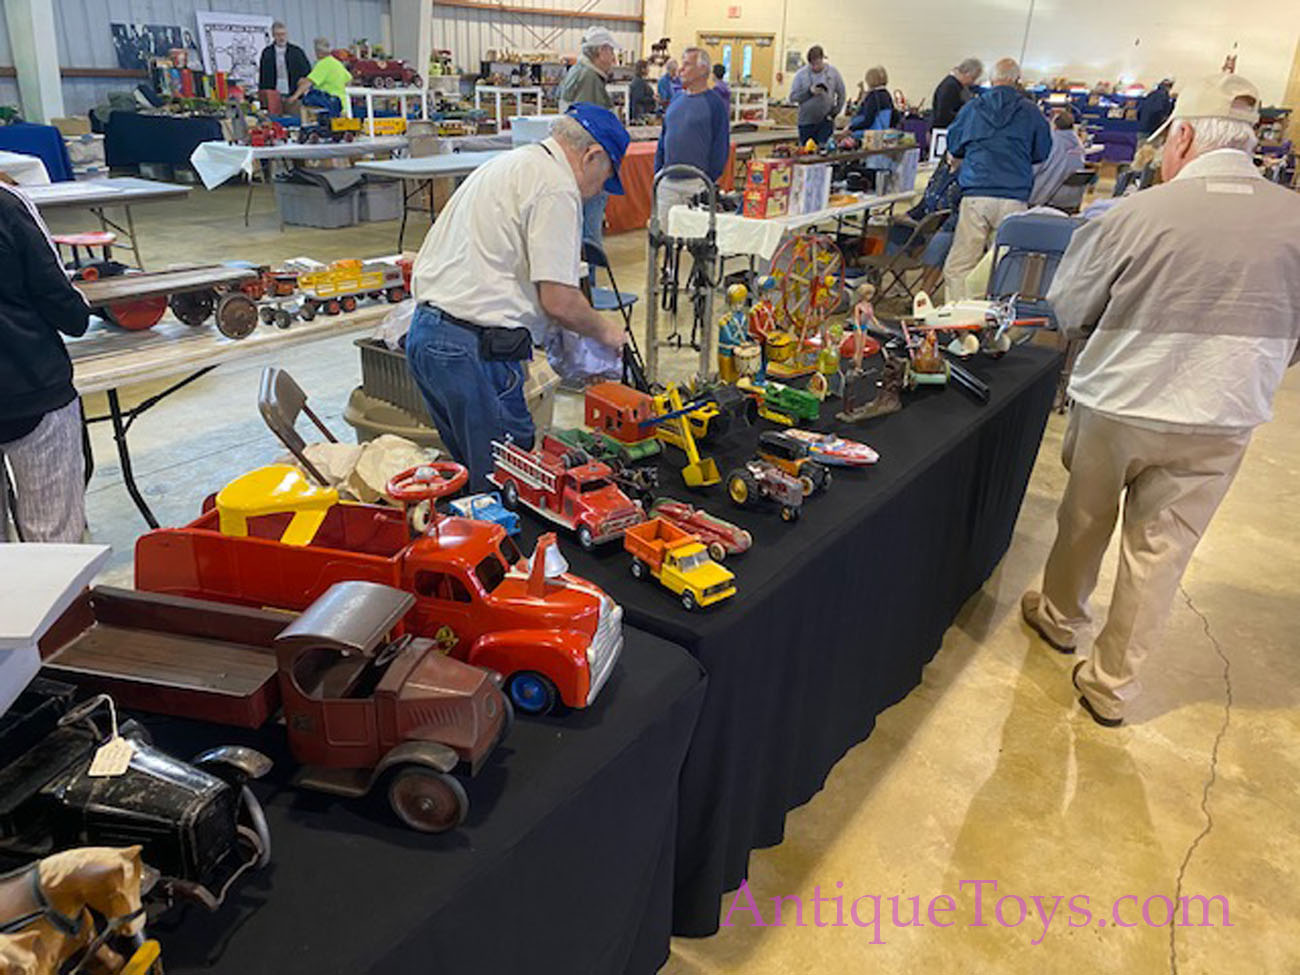 Florida Toy Show 2020 Central Fl